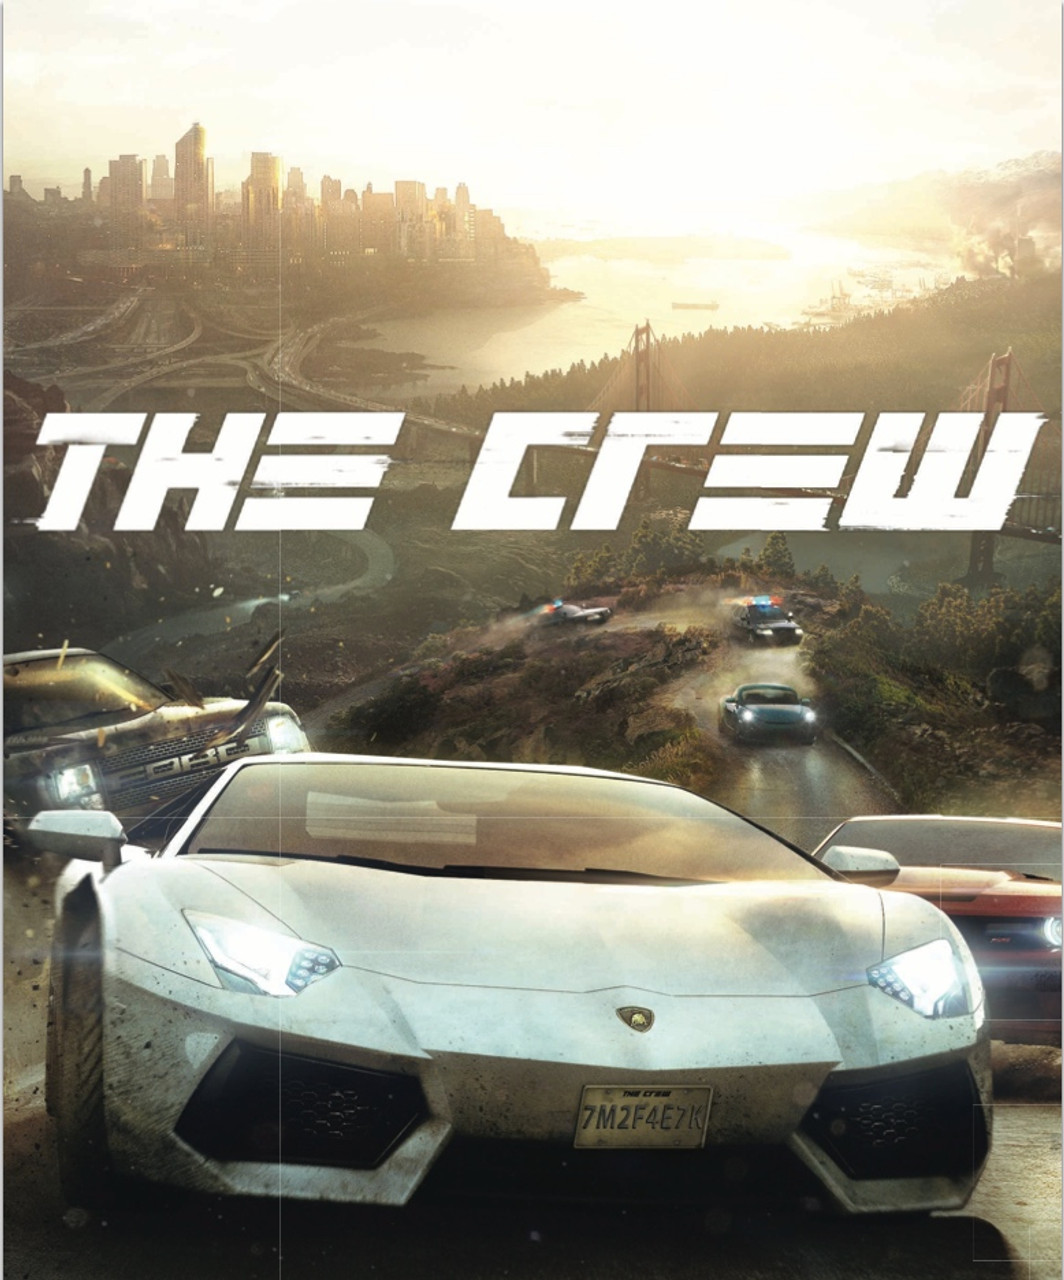 The Crew - Never Drive Alone Microsoft Xbox 360 Racing Game